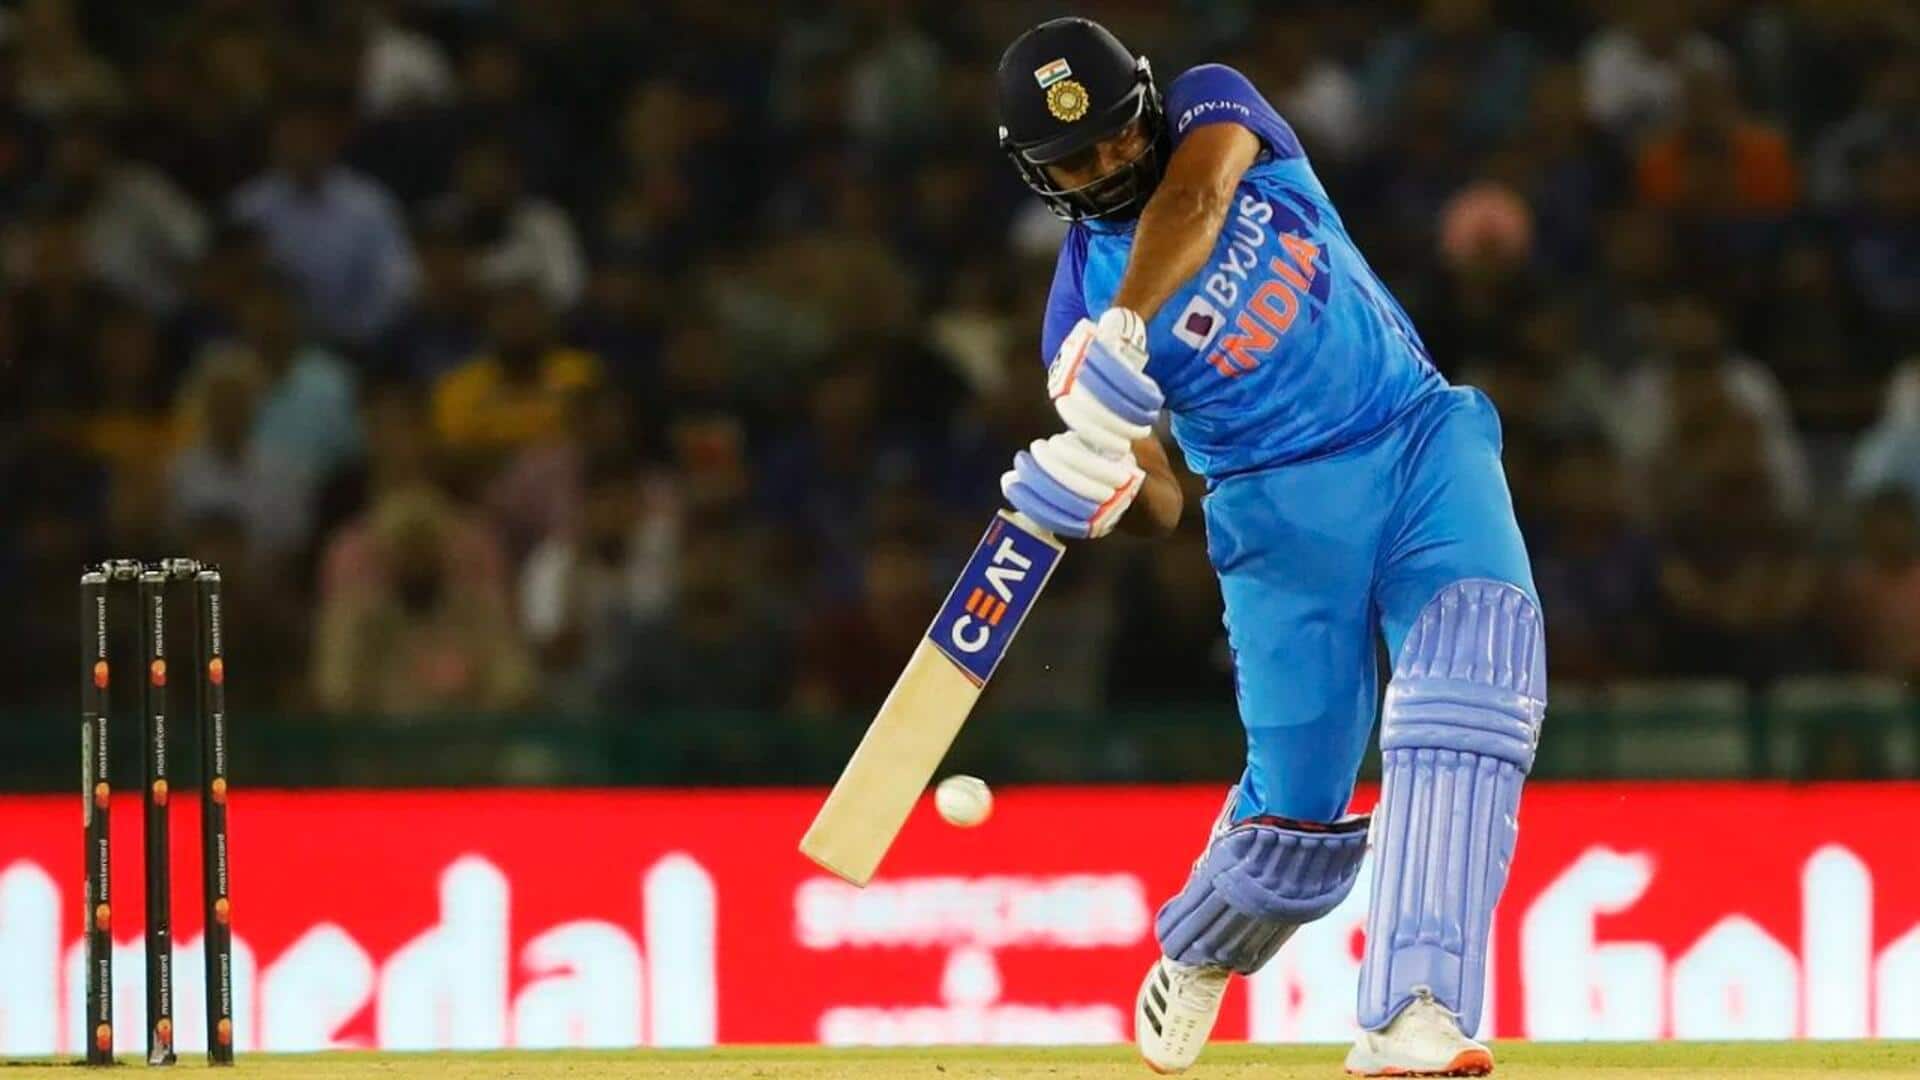 Rohit Sharma becomes India's highest run-scorer as captain (T20Is): Stats